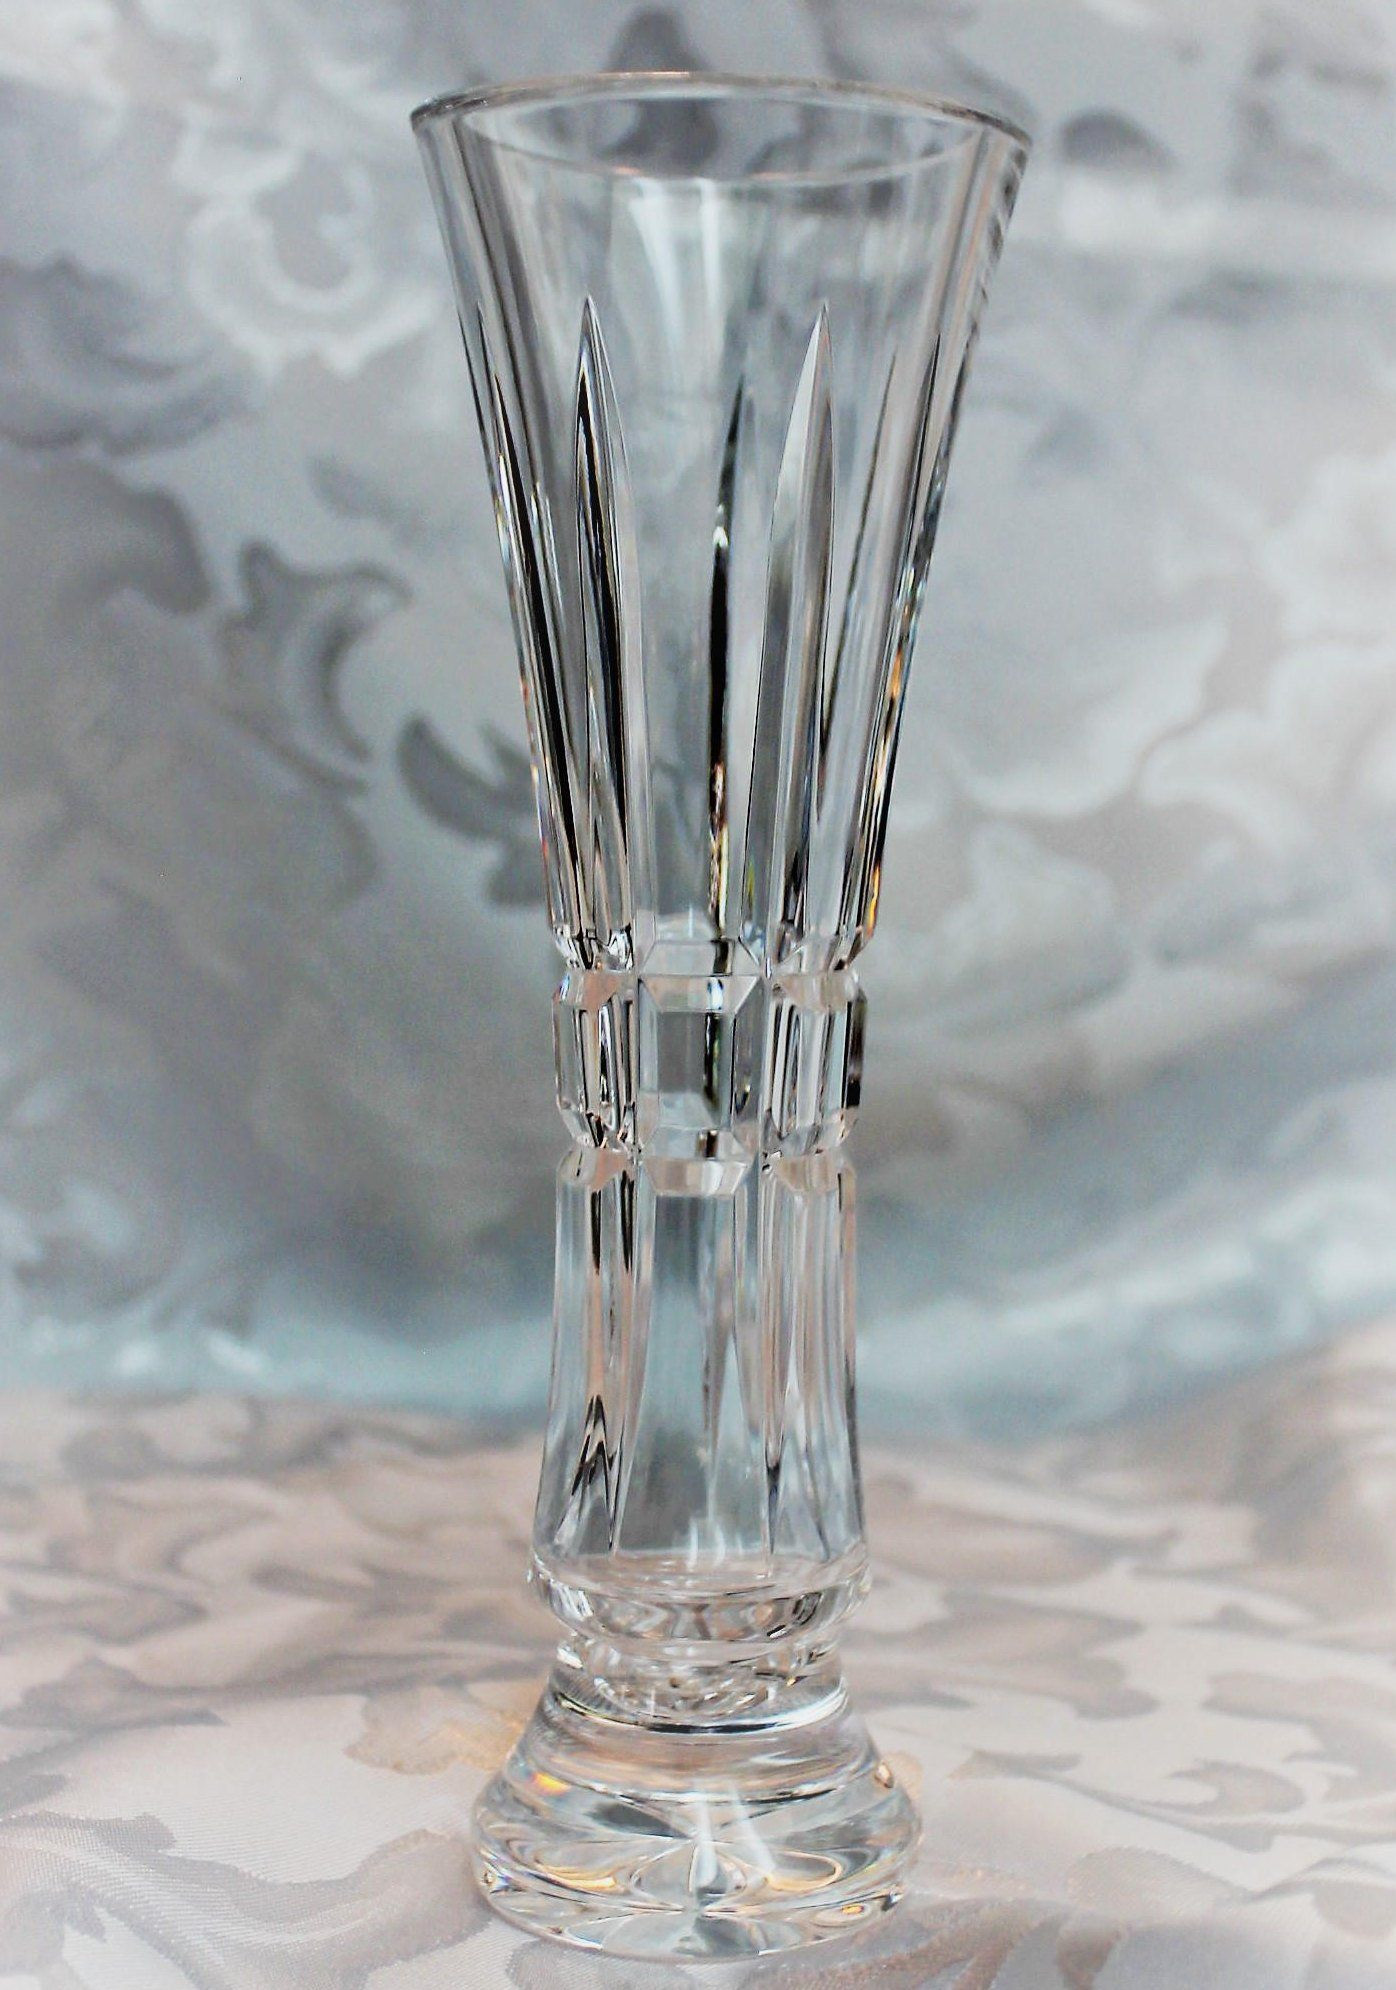 clear round glass vases wholesale of 22 hobnail glass vase the weekly world with cut glass bud vase